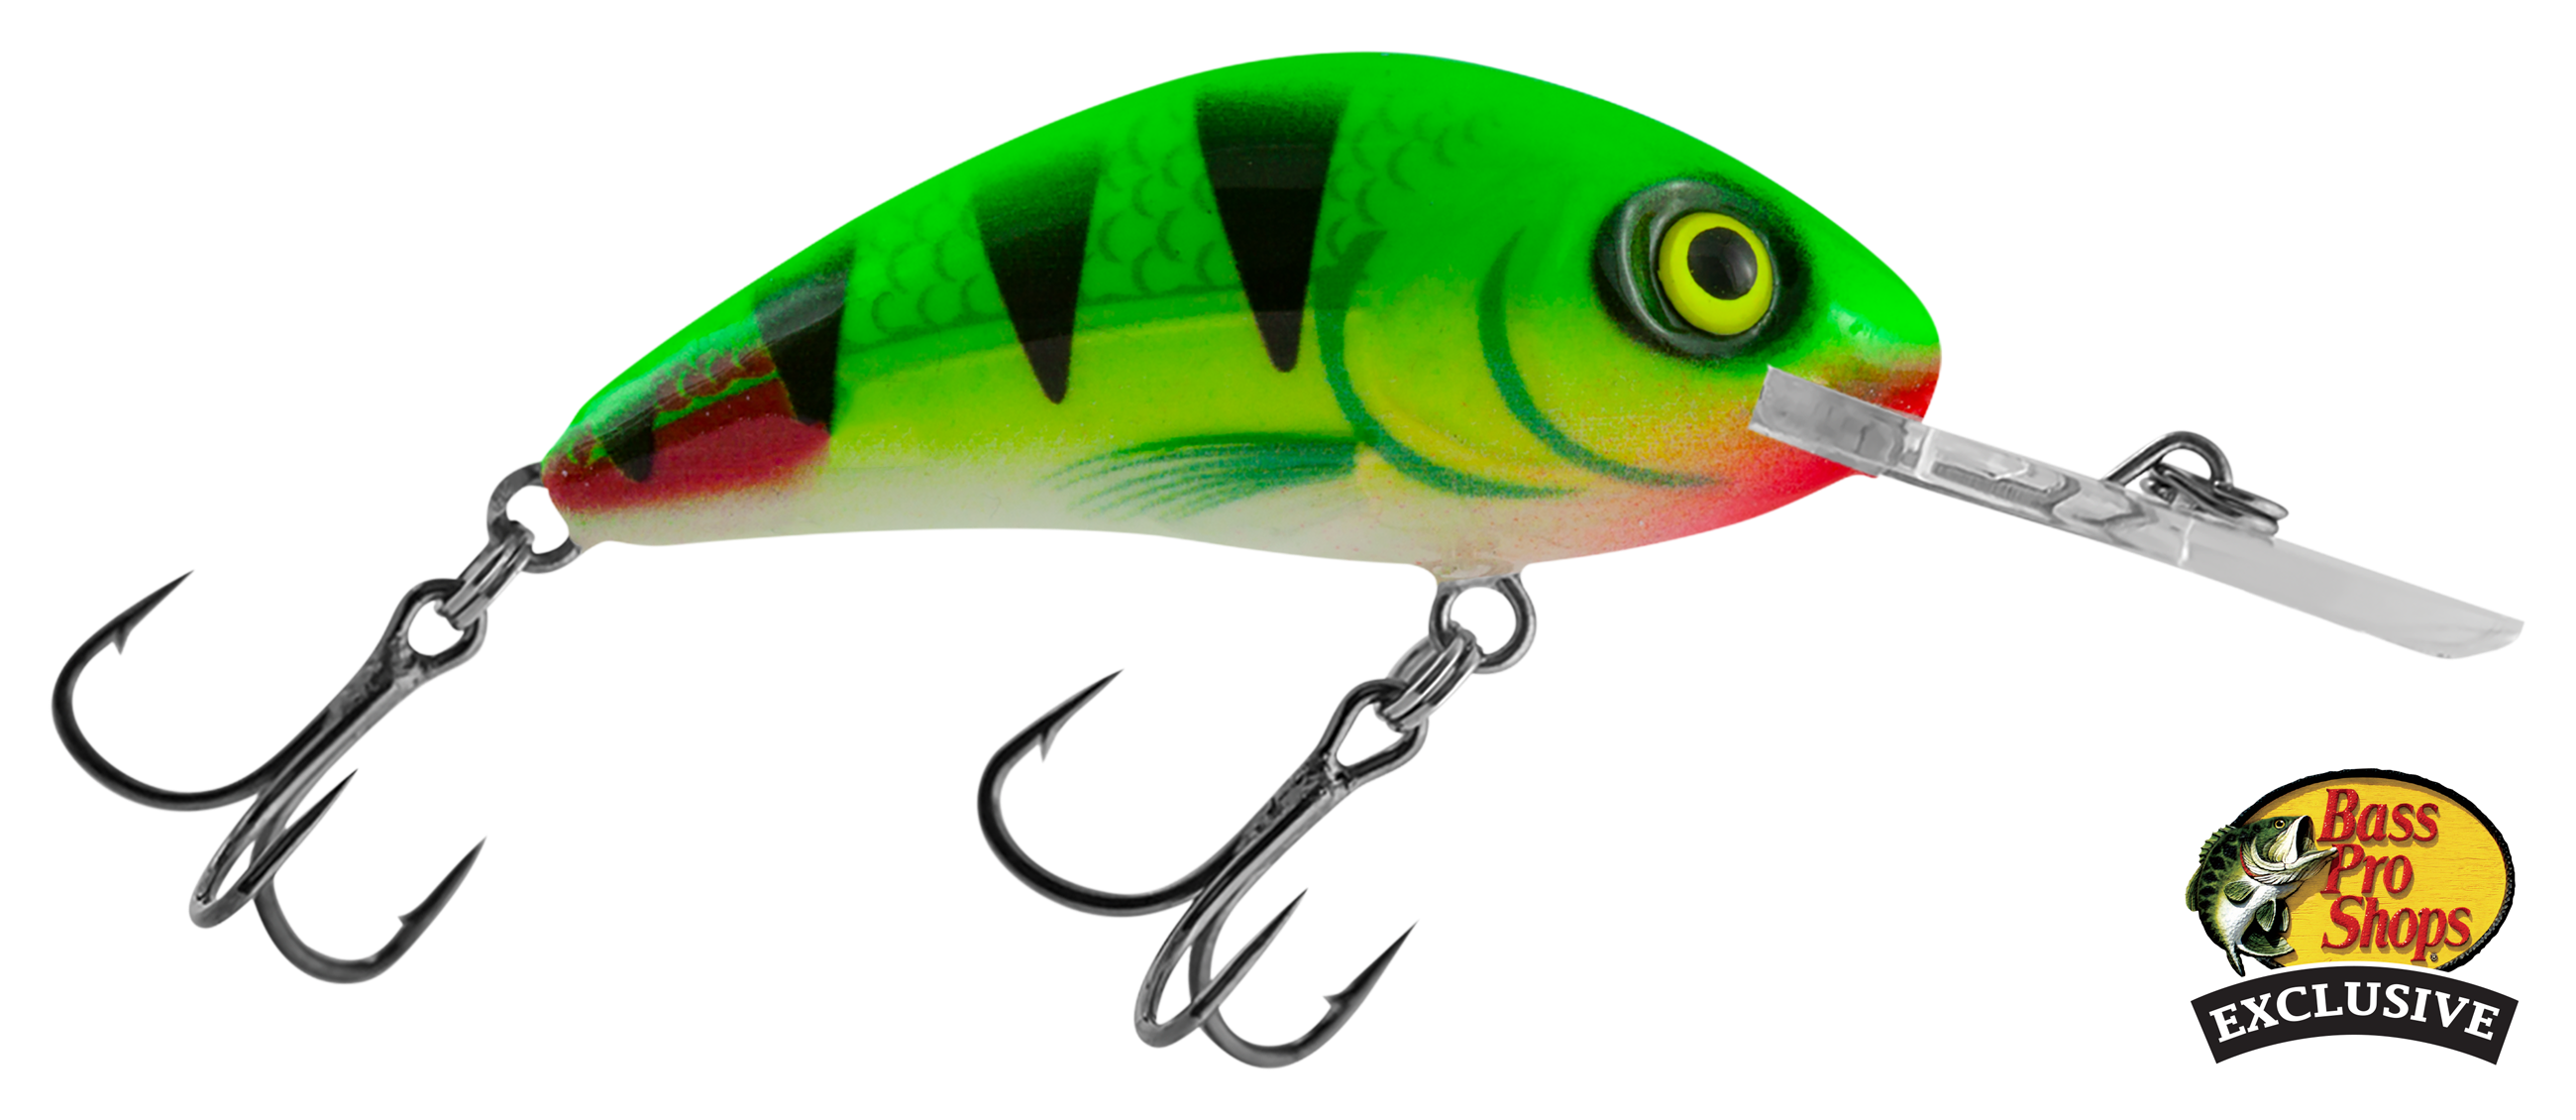 Holographic Purple Rattling Hornet Floating Crankbait by Salmo at